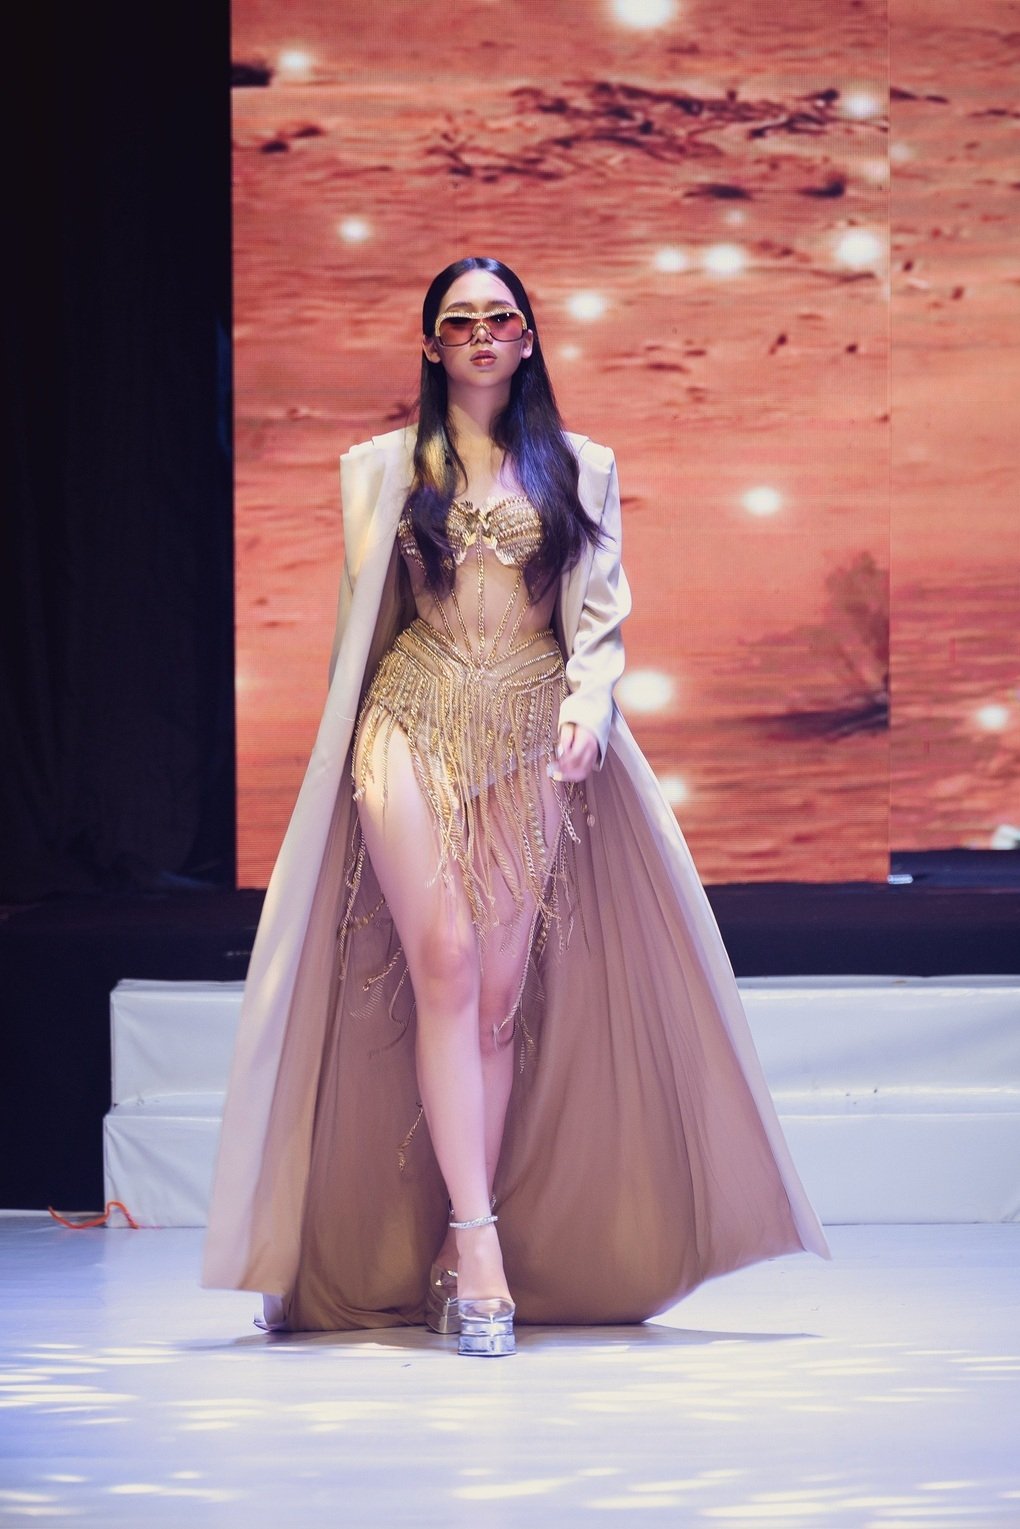 Supermodel student Xuan Lan strides confidently on the catwalk 2